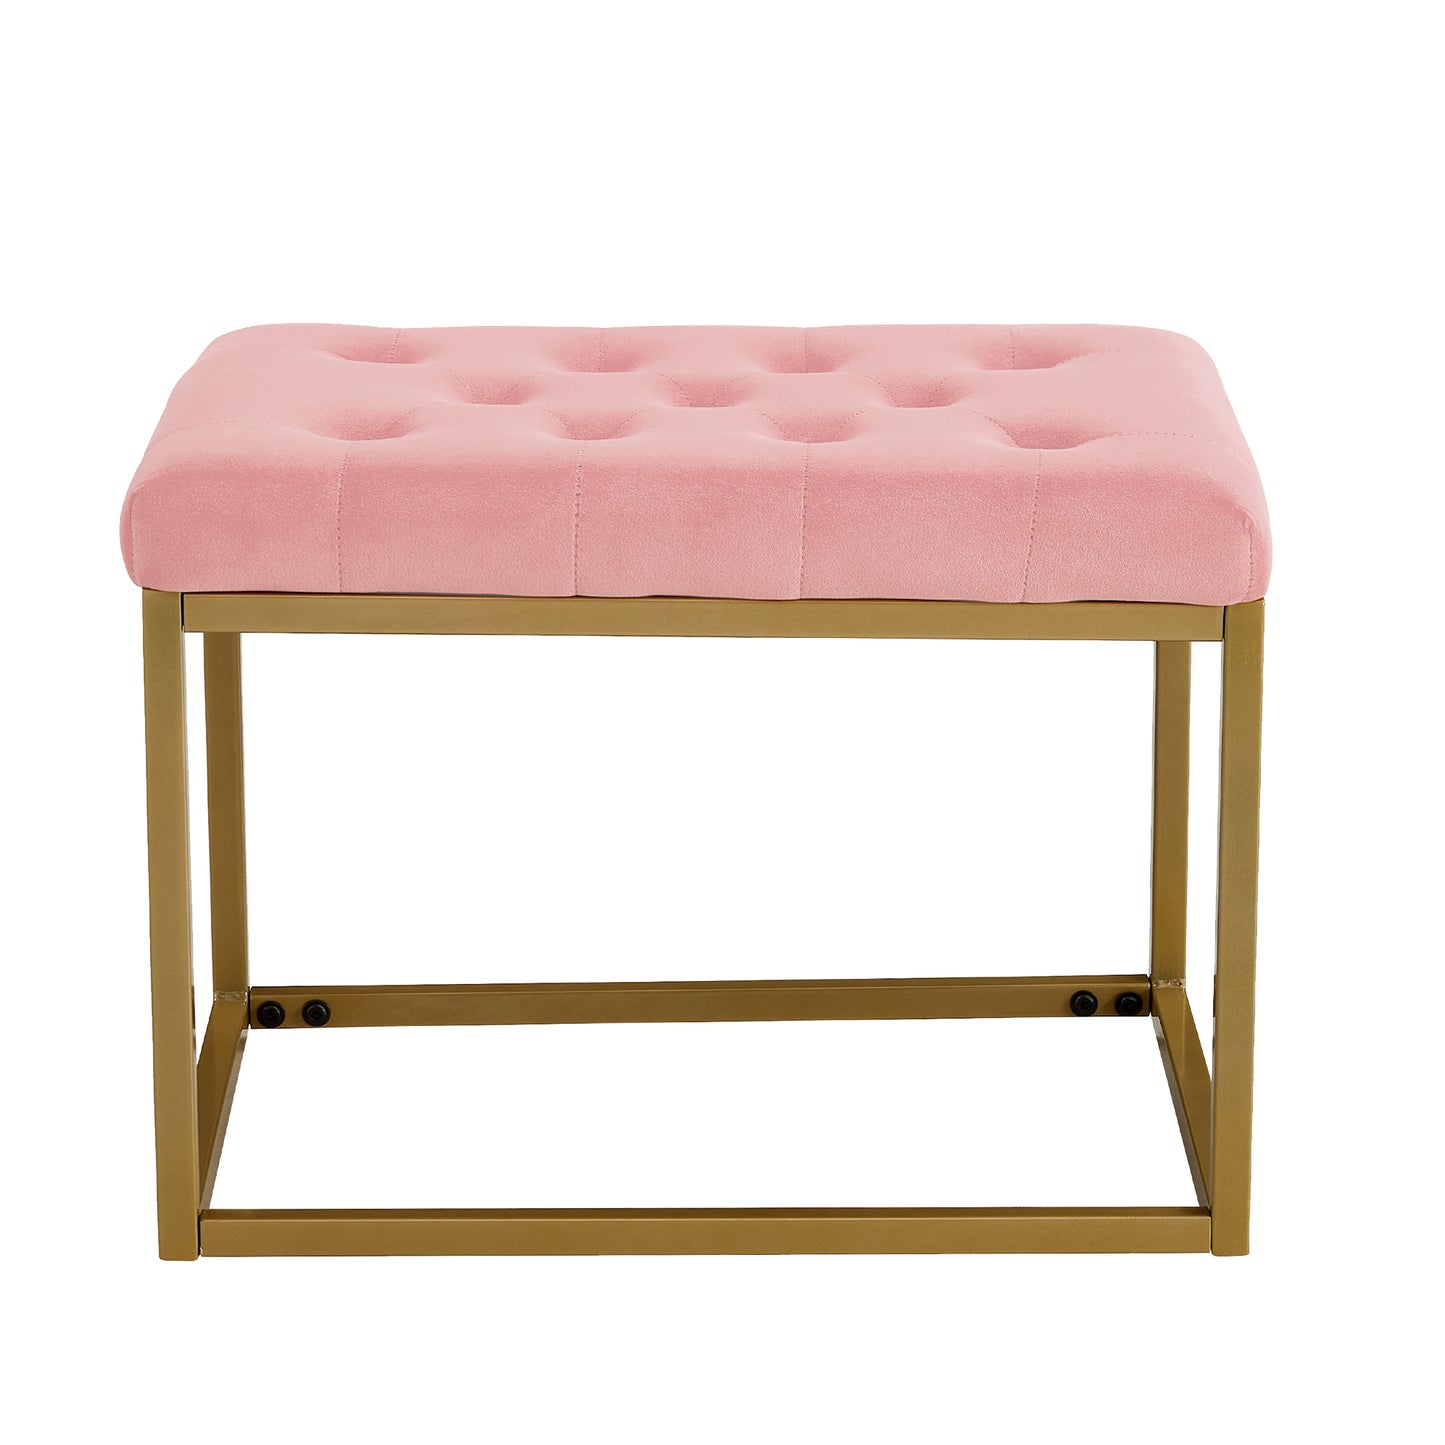 Velvet Shoe Changing Stool, Footstool, Square Cushion Foot Stool, Sofa stool, Rest stool,Low Stool .Step Stool, Small Footrest .Suitable for Clothes Shop,Living Room,Fitting Room.Pink BenchST-001